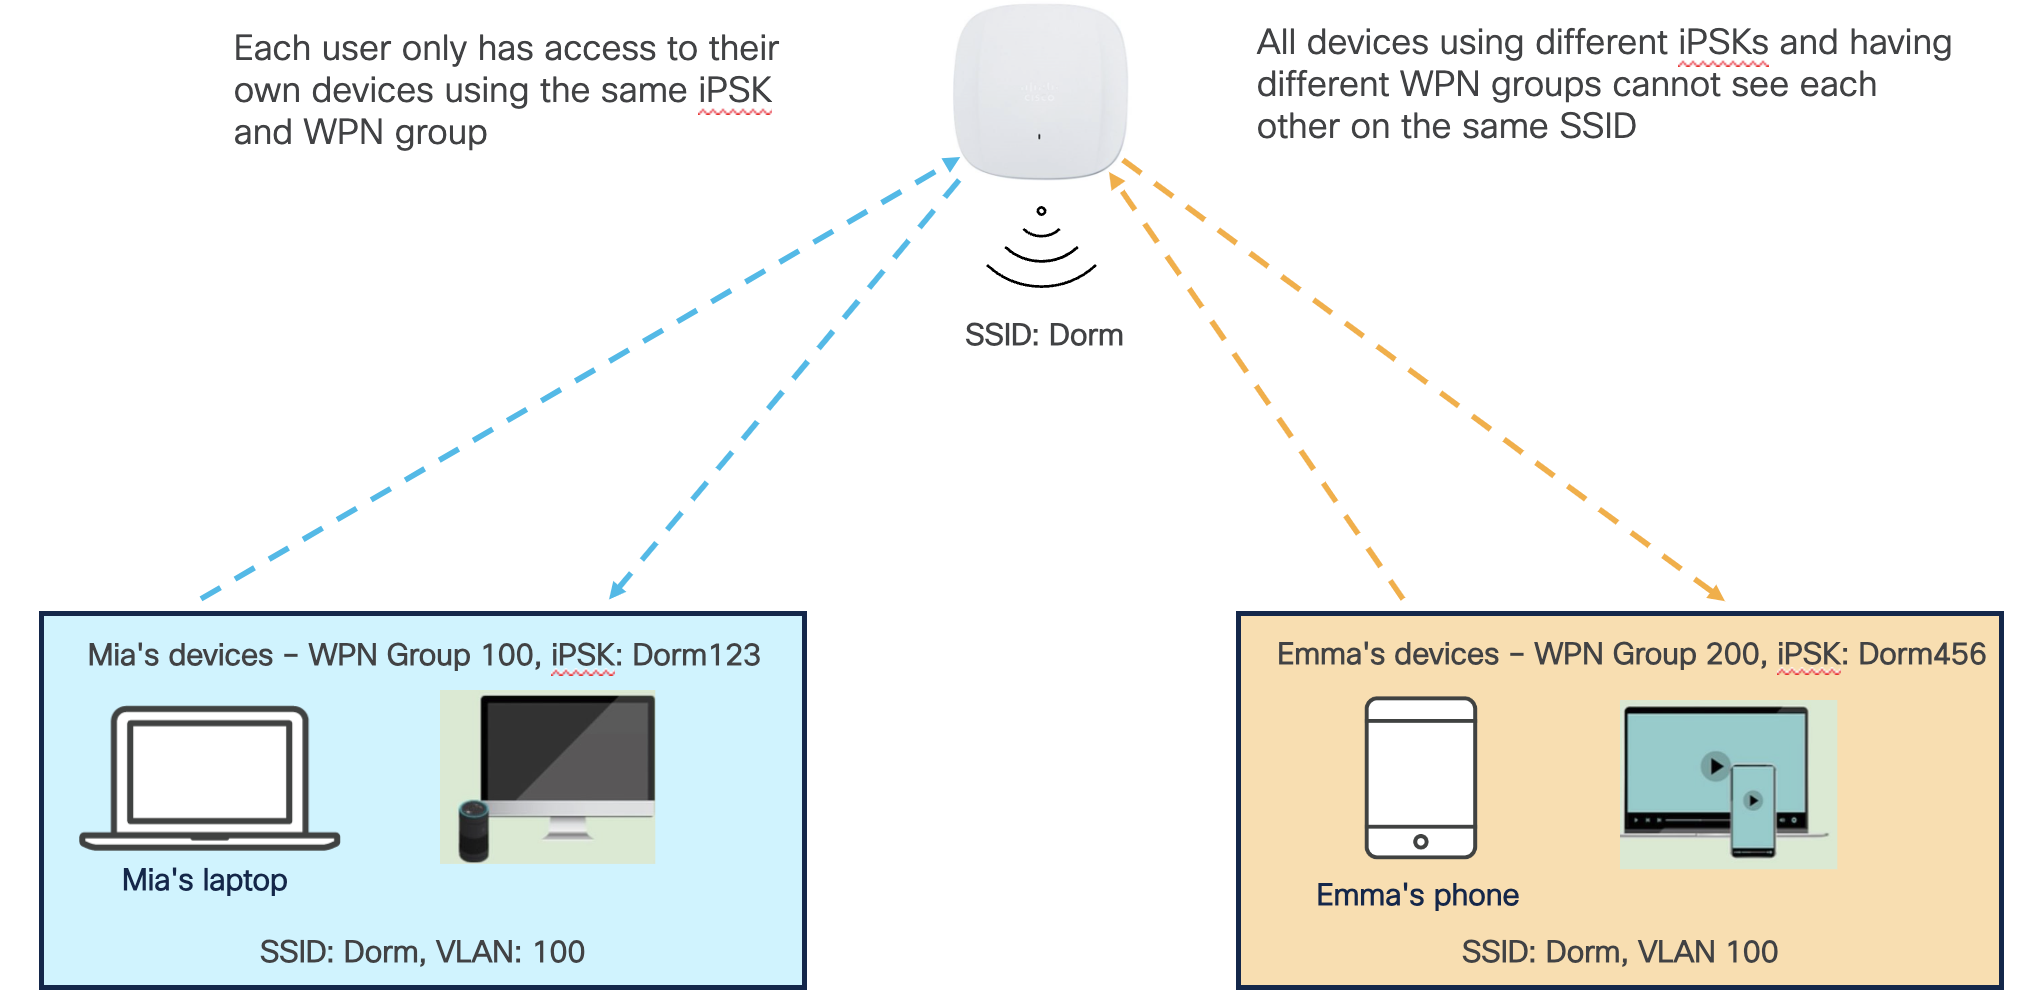 Diagram showing Mia's devices and Emma's devices (from the example above) connected to SSID: Dorm but being in different WPN. Each user only has access to their own devices using the same IPSK and WPN group. All devices using different iPSKs and having different WPN groups cannot see each other on the same SSID.